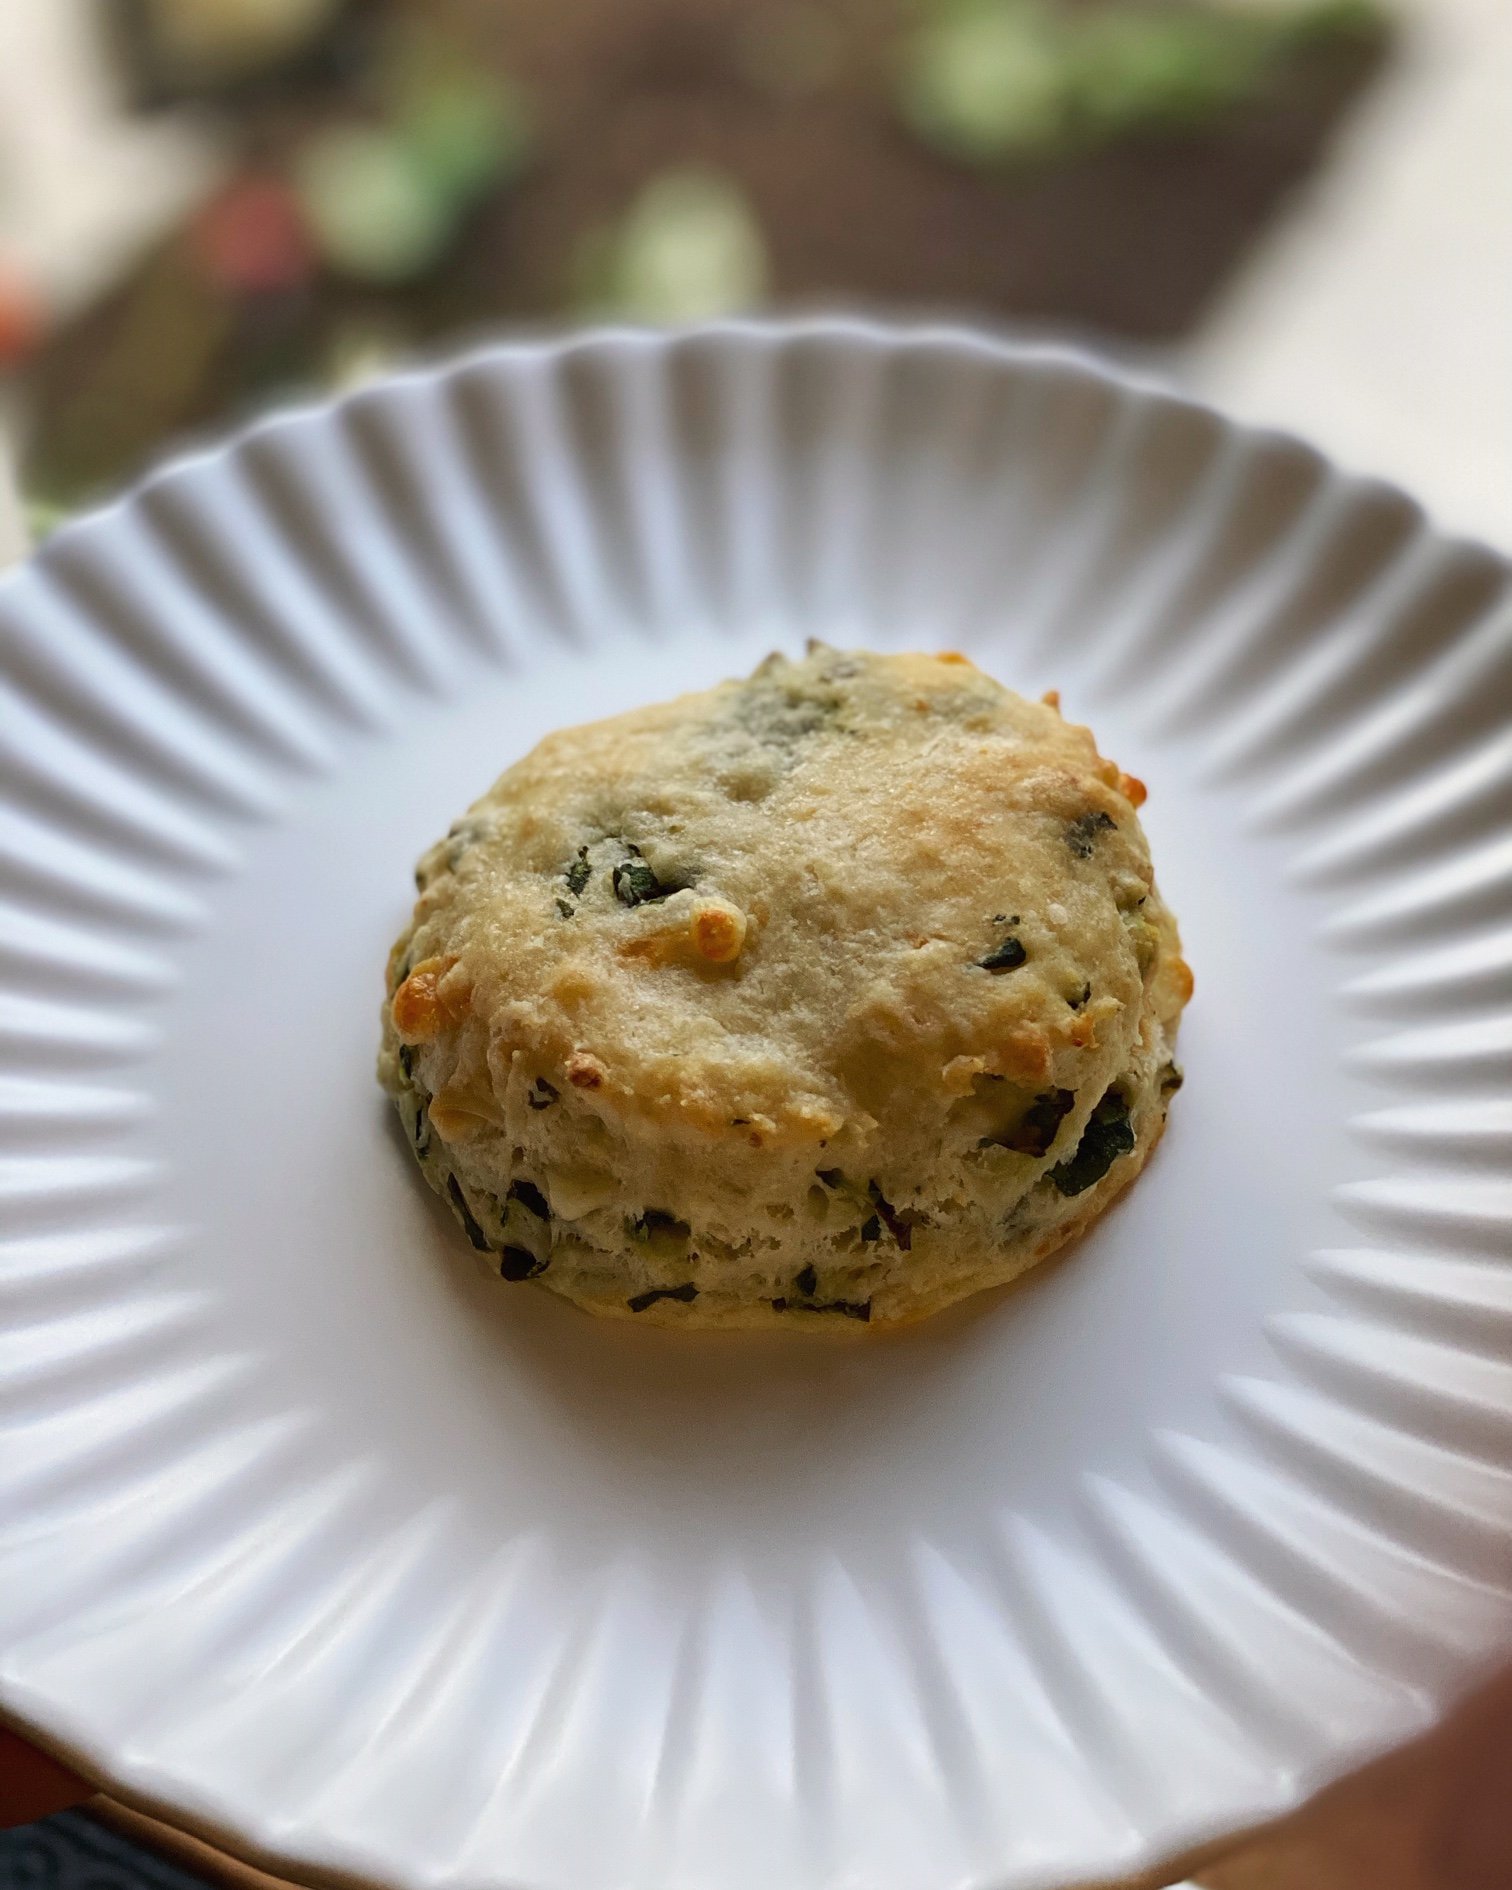 Flaky biscuits (spinach cheese, pictured; plain &amp; cheddar black pepper also available) $4/ea; $20/6